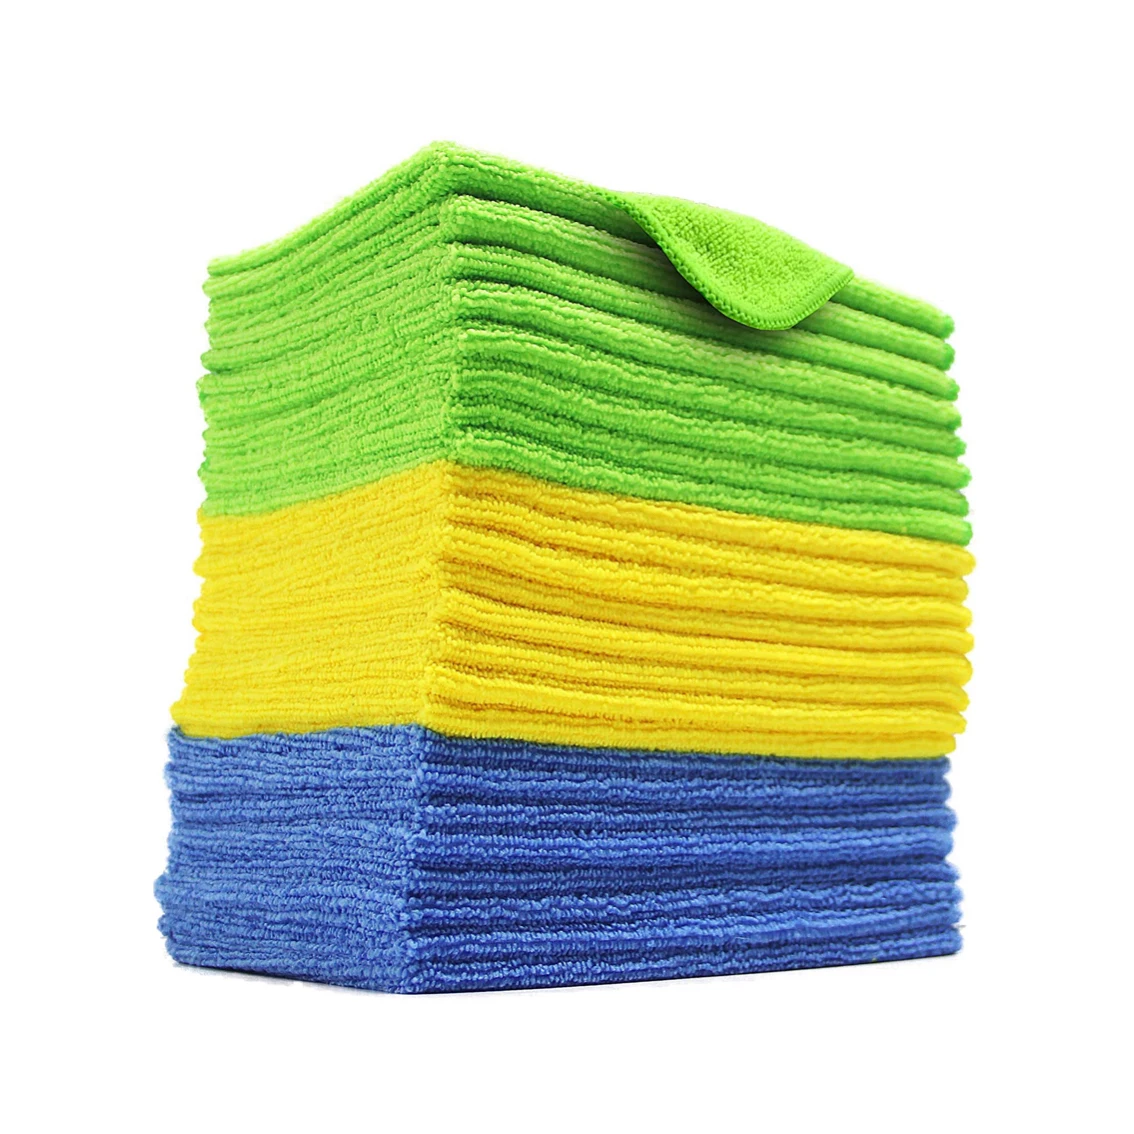 Factory sale low price microfiber towel super water absorption housework microfiber super dry cleaning cloth cleaning rag towel